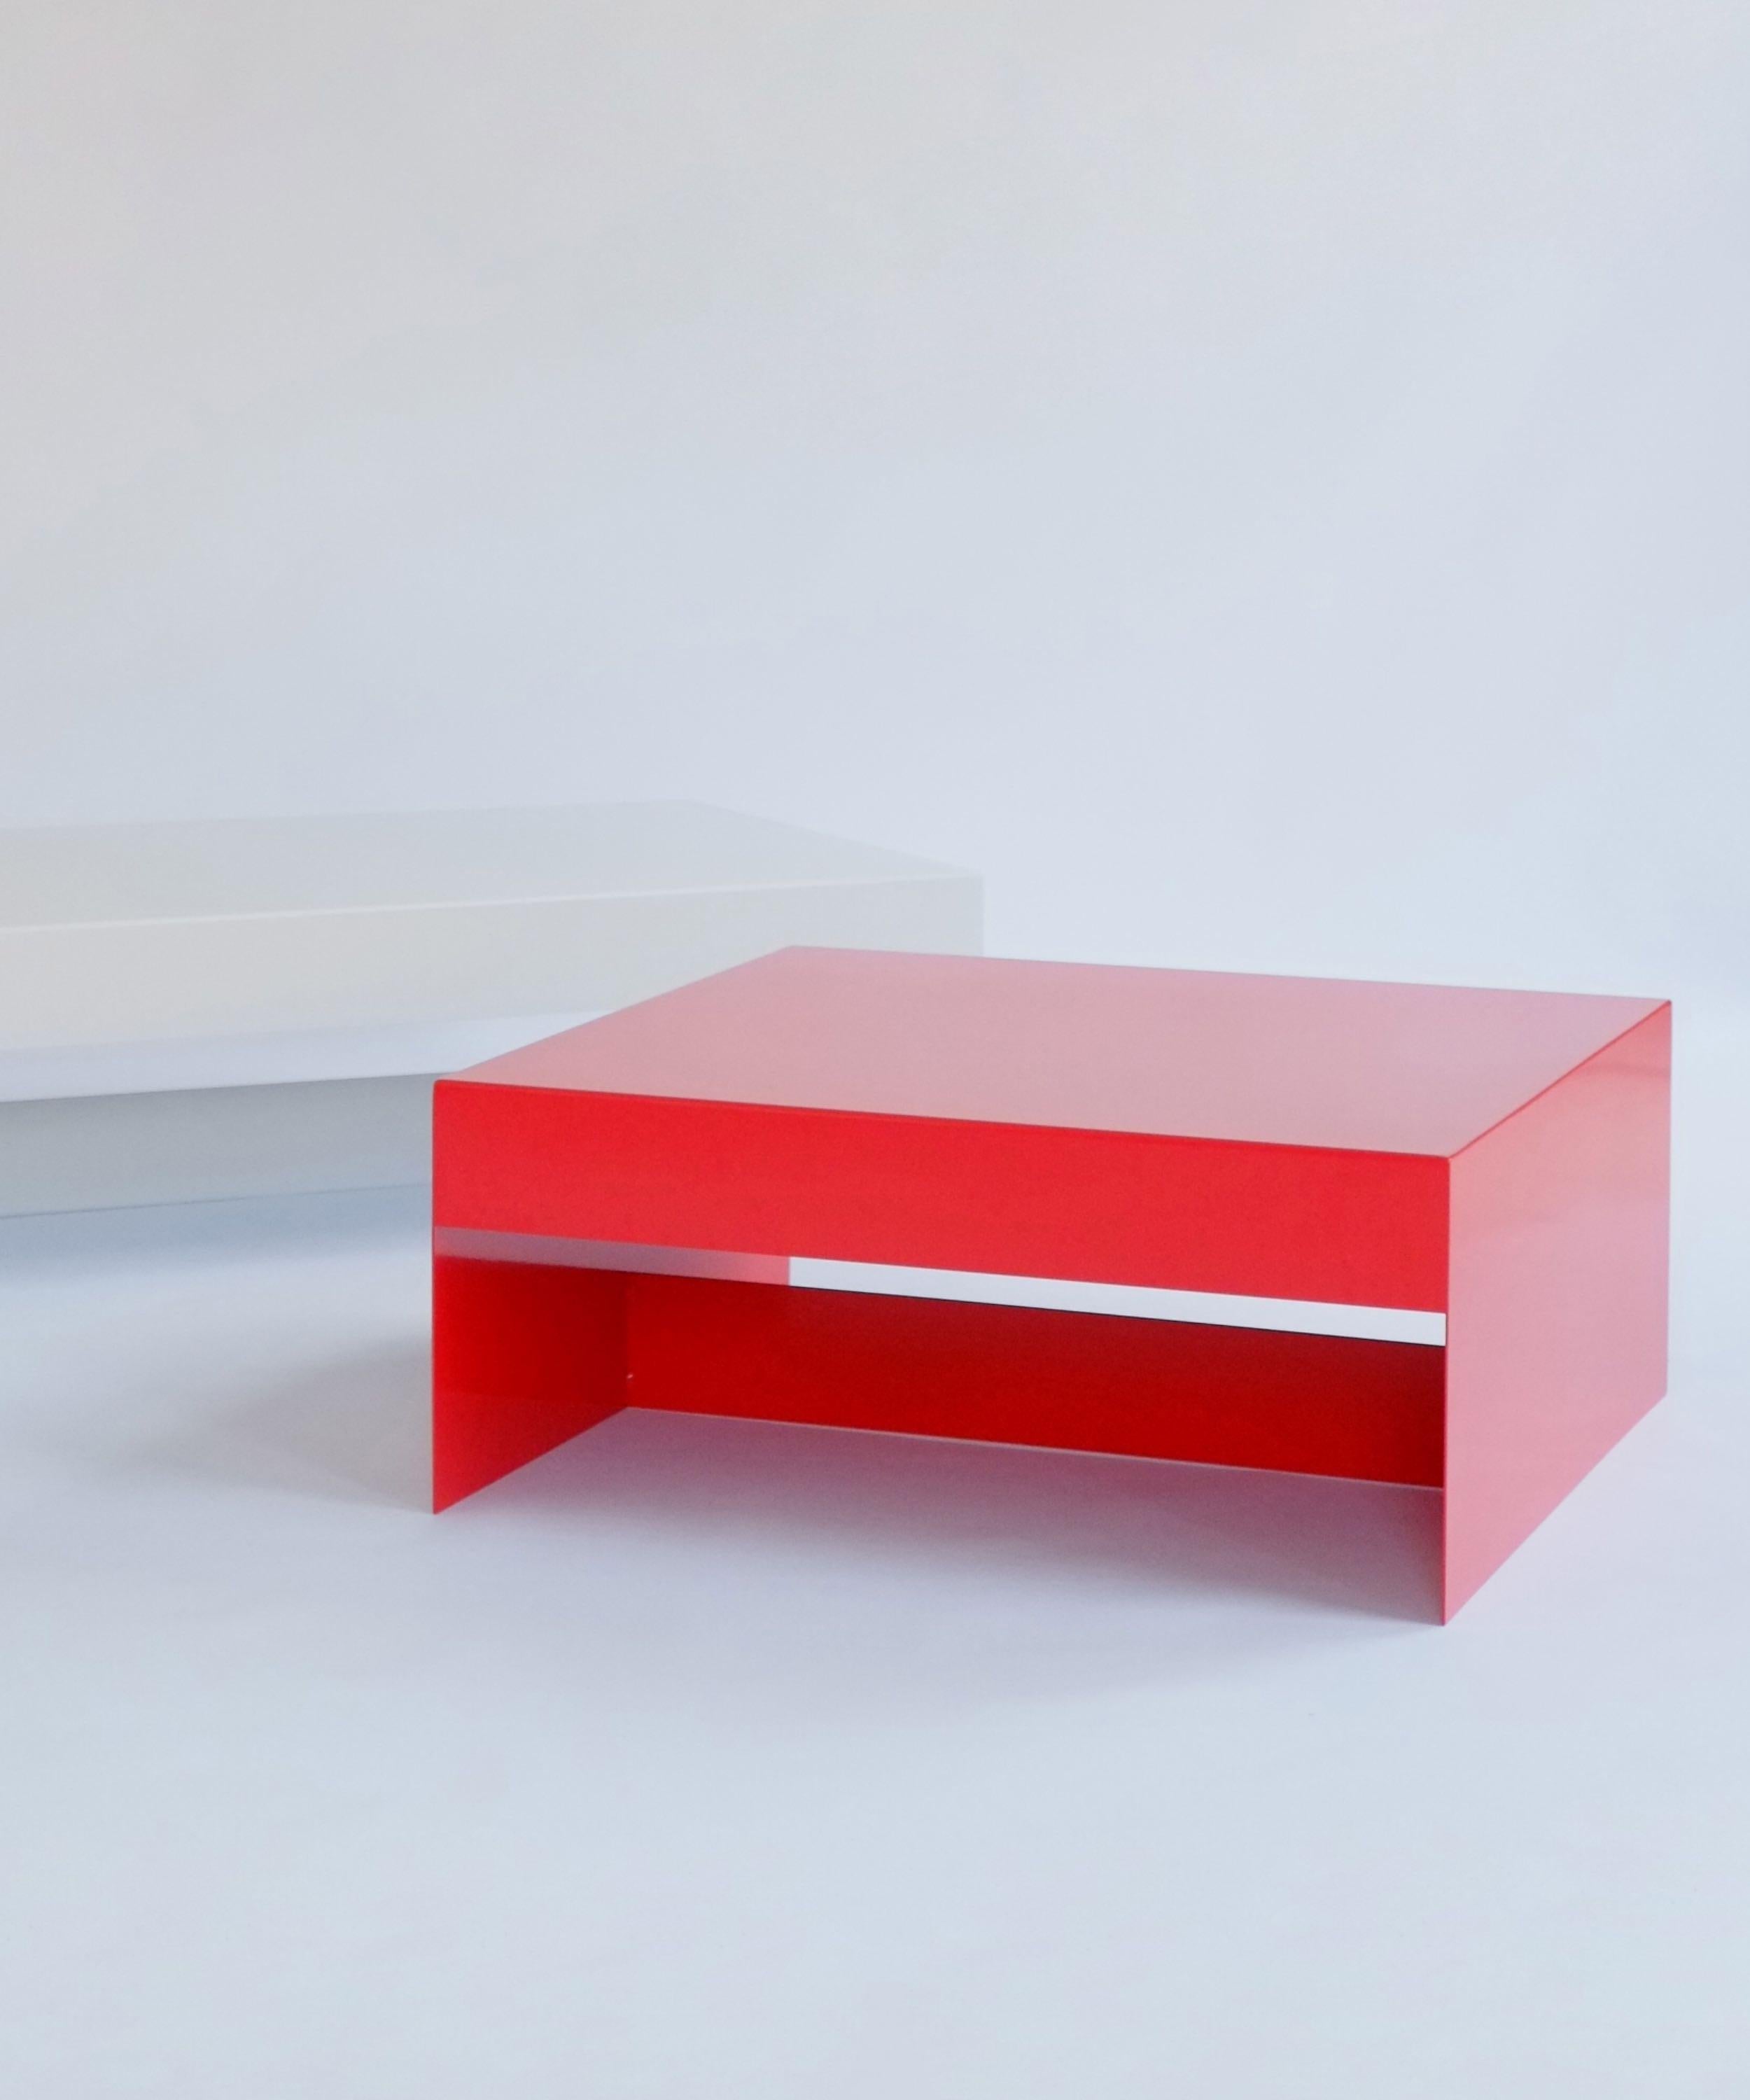 Our latest design - the single form coffee table. An elemental with focus on form and function. Made in powder coated aluminium and available in customisable colours, the Single Form coffee table is a surprising design which is bold and lightweight.